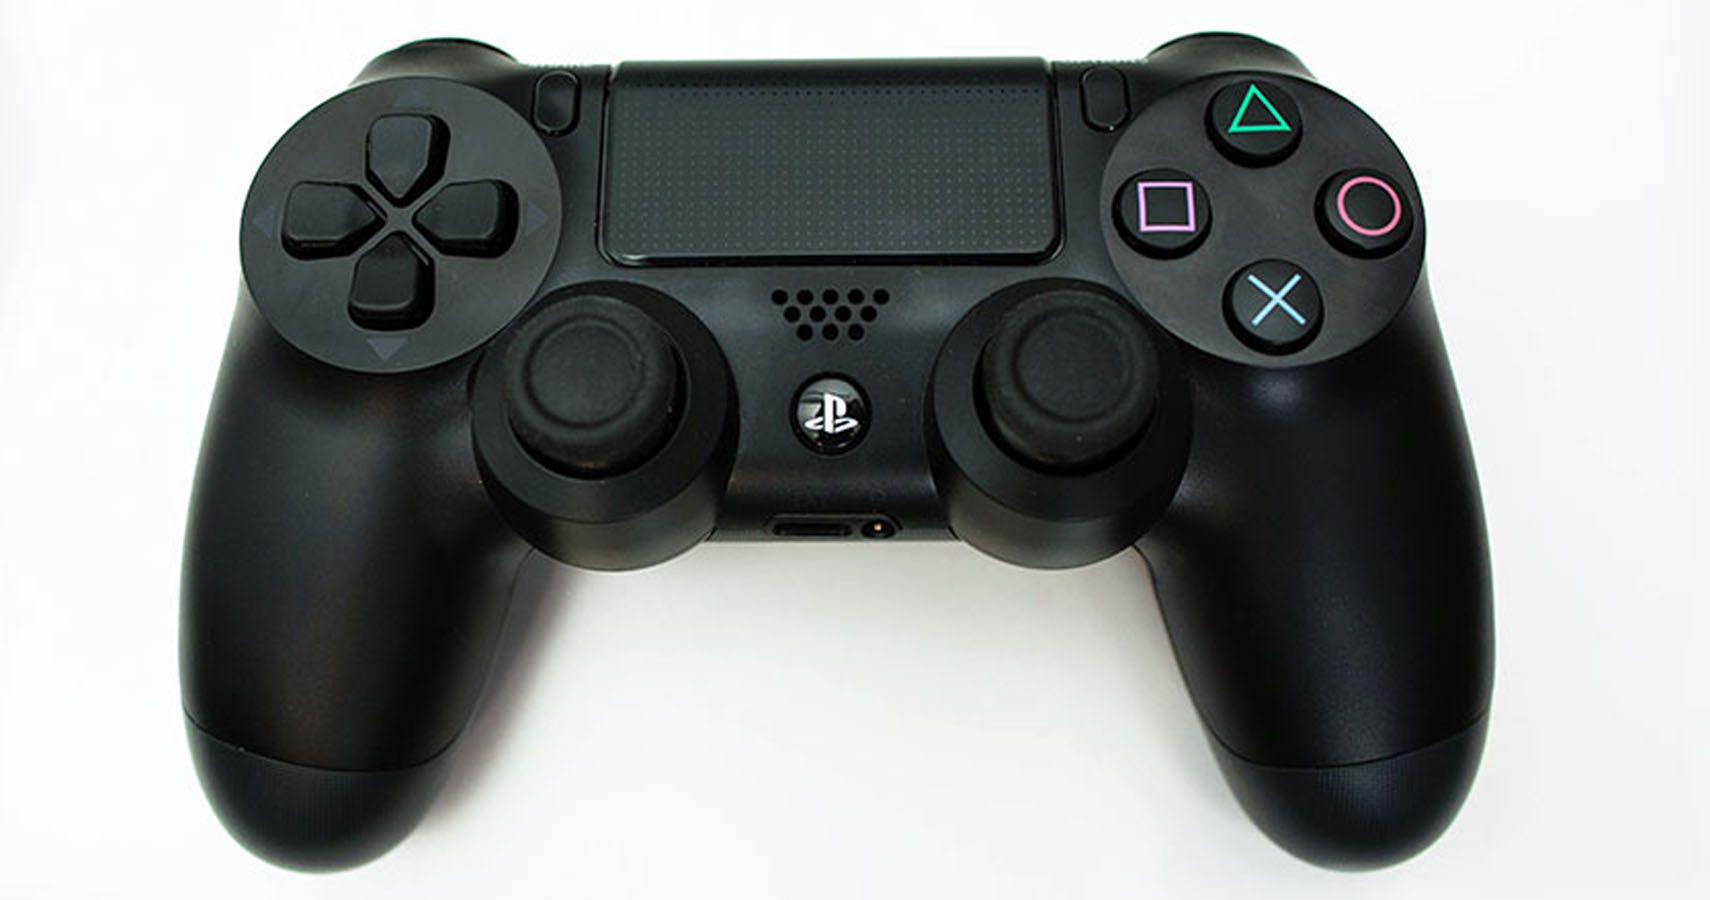 10 Best Games That Actually Utilize The PS4 Gamepad Control, Ranked